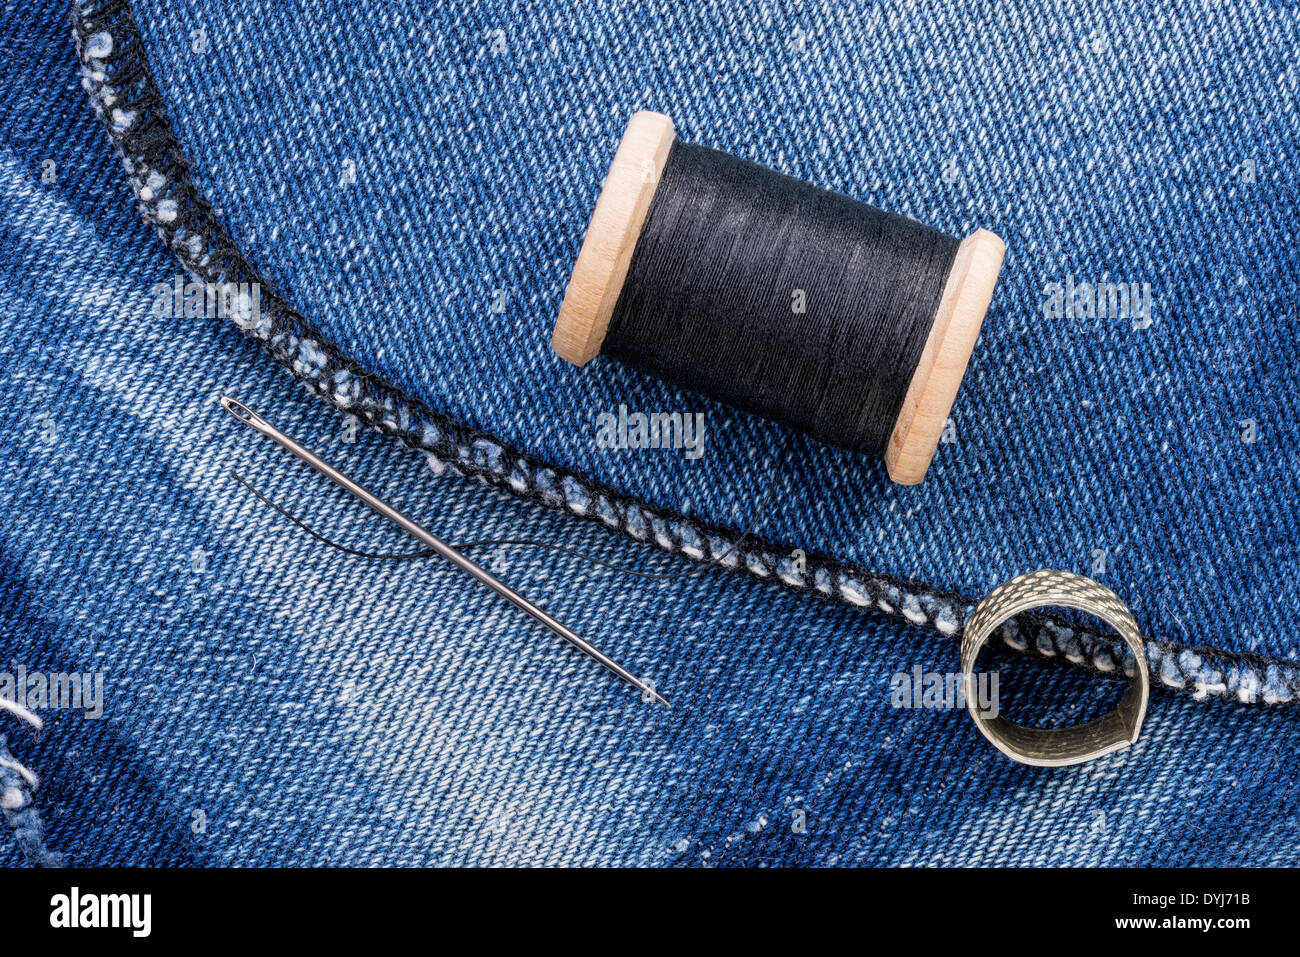 A roll of black thread and a needle on a piece of blue jeans denim Stock Photo